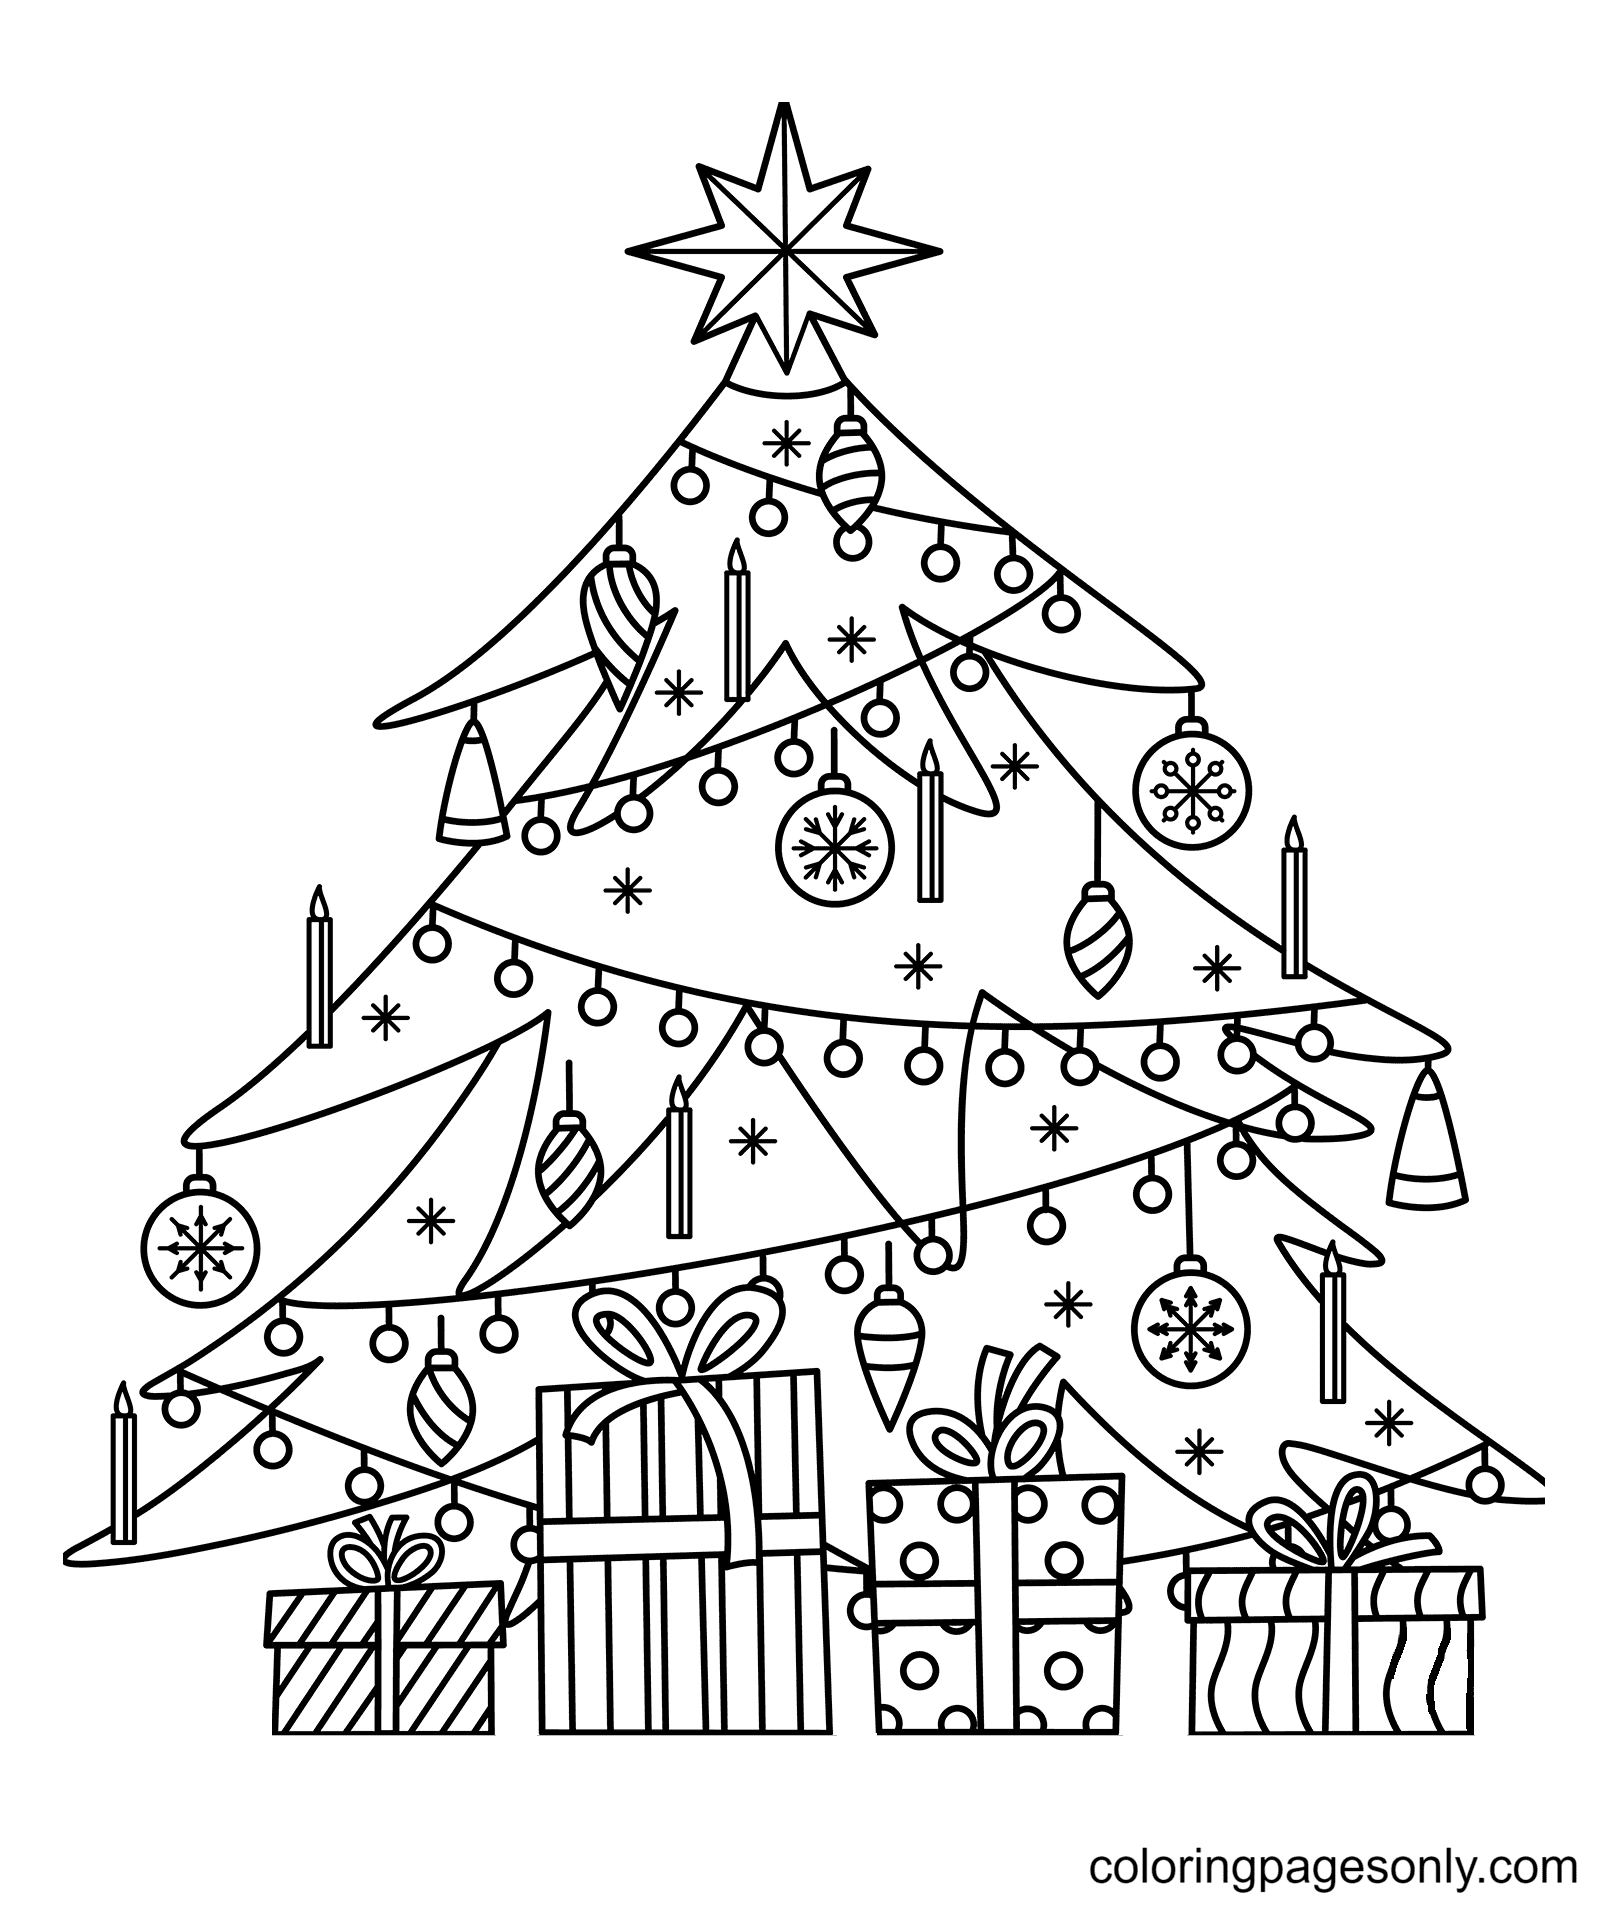 printable-christmas-tree-coloring-pages-free-printable-coloring-pages